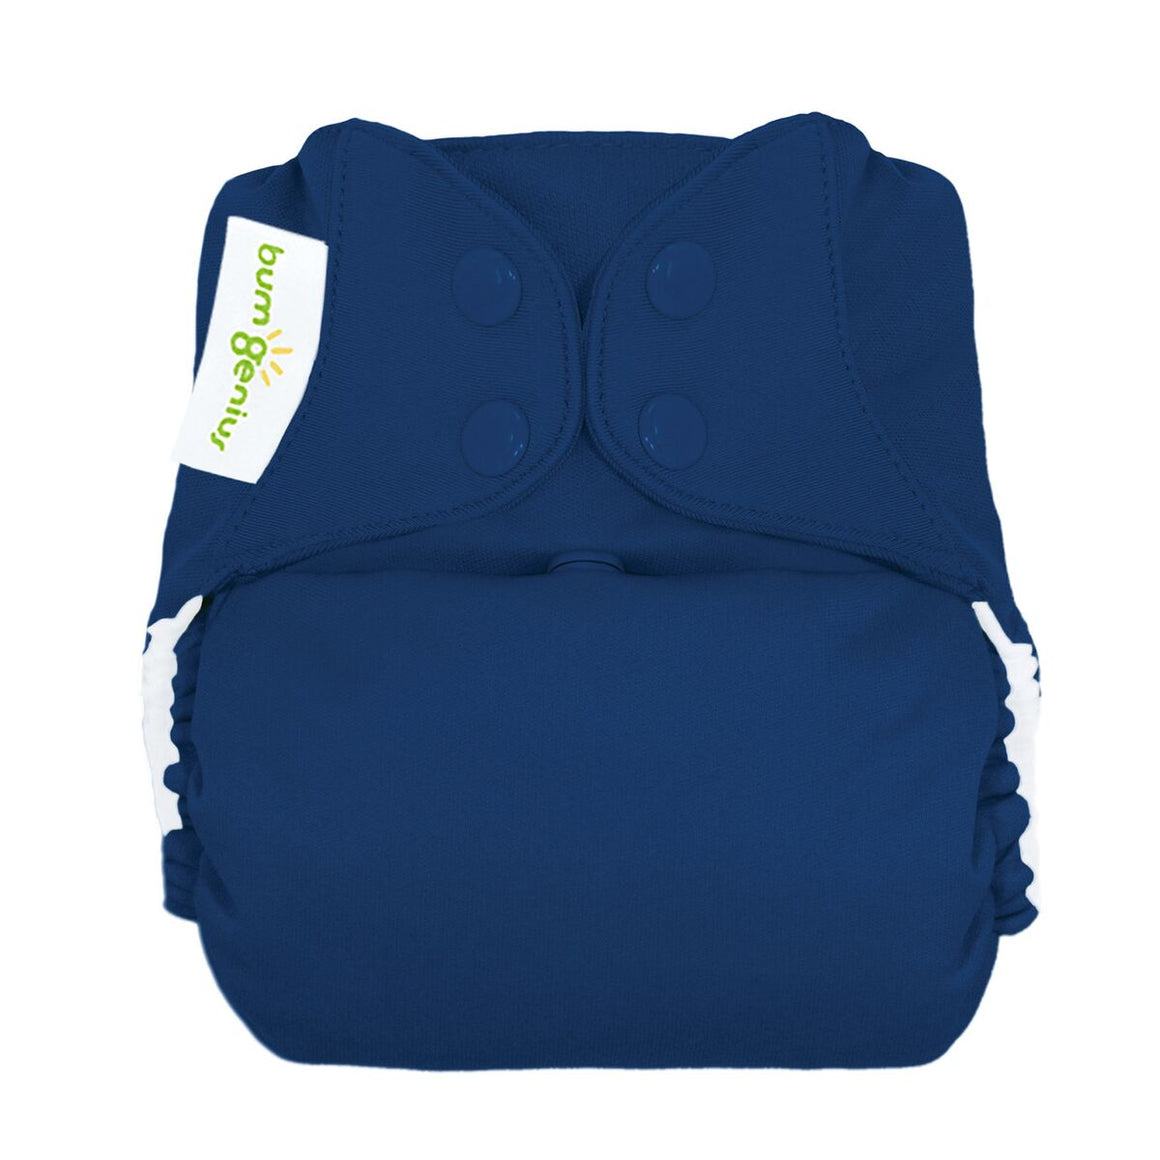 buy gently used bumgenius freetime cloth diapers, used less than 30 days